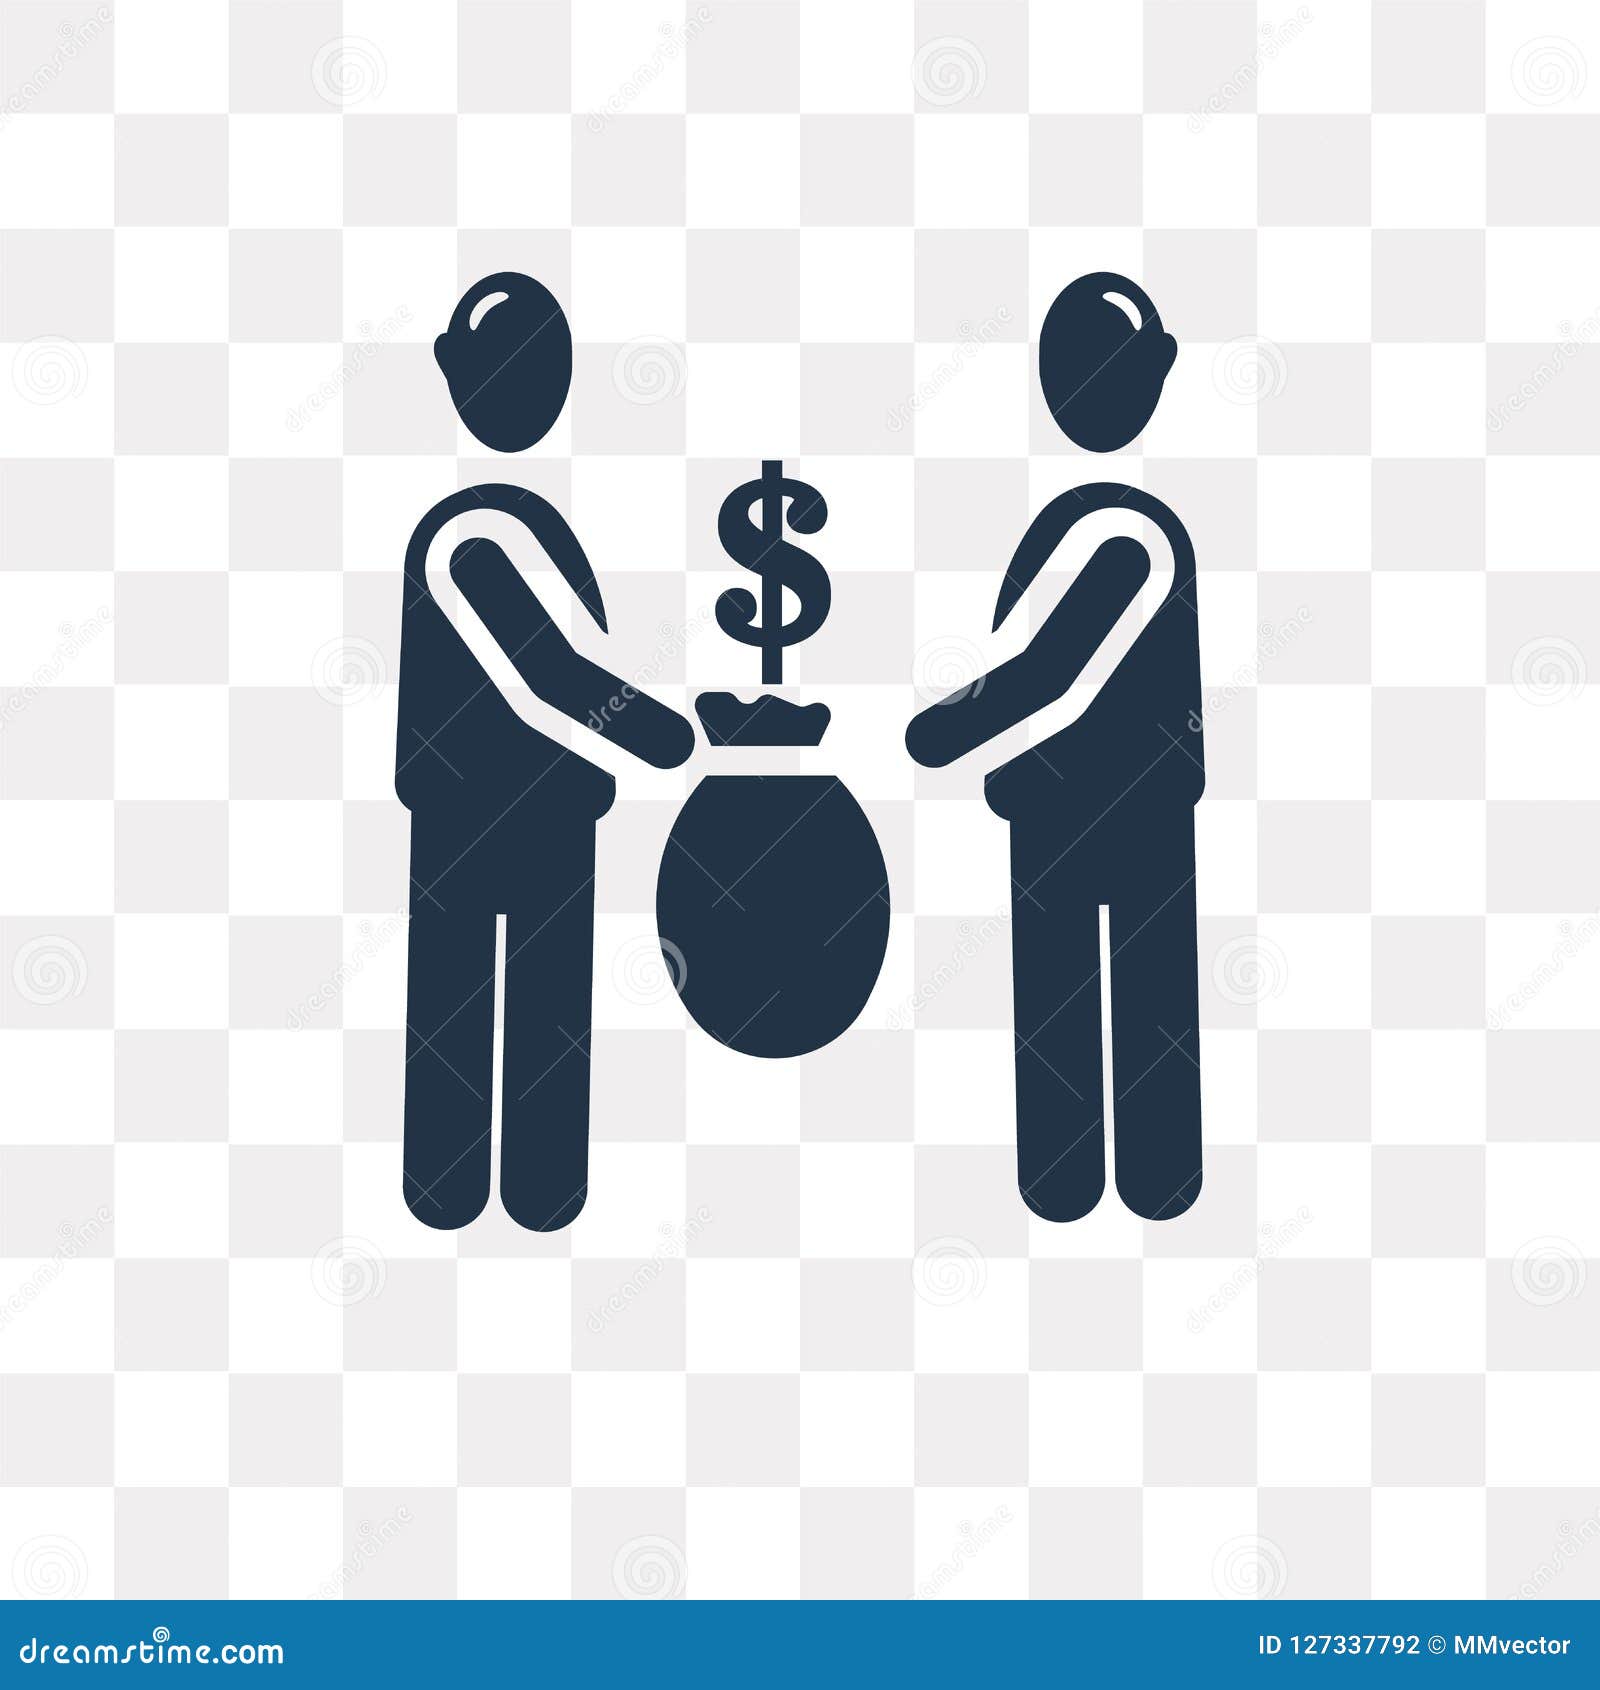 People Trading Vector Icon Isolated On Transparent ...